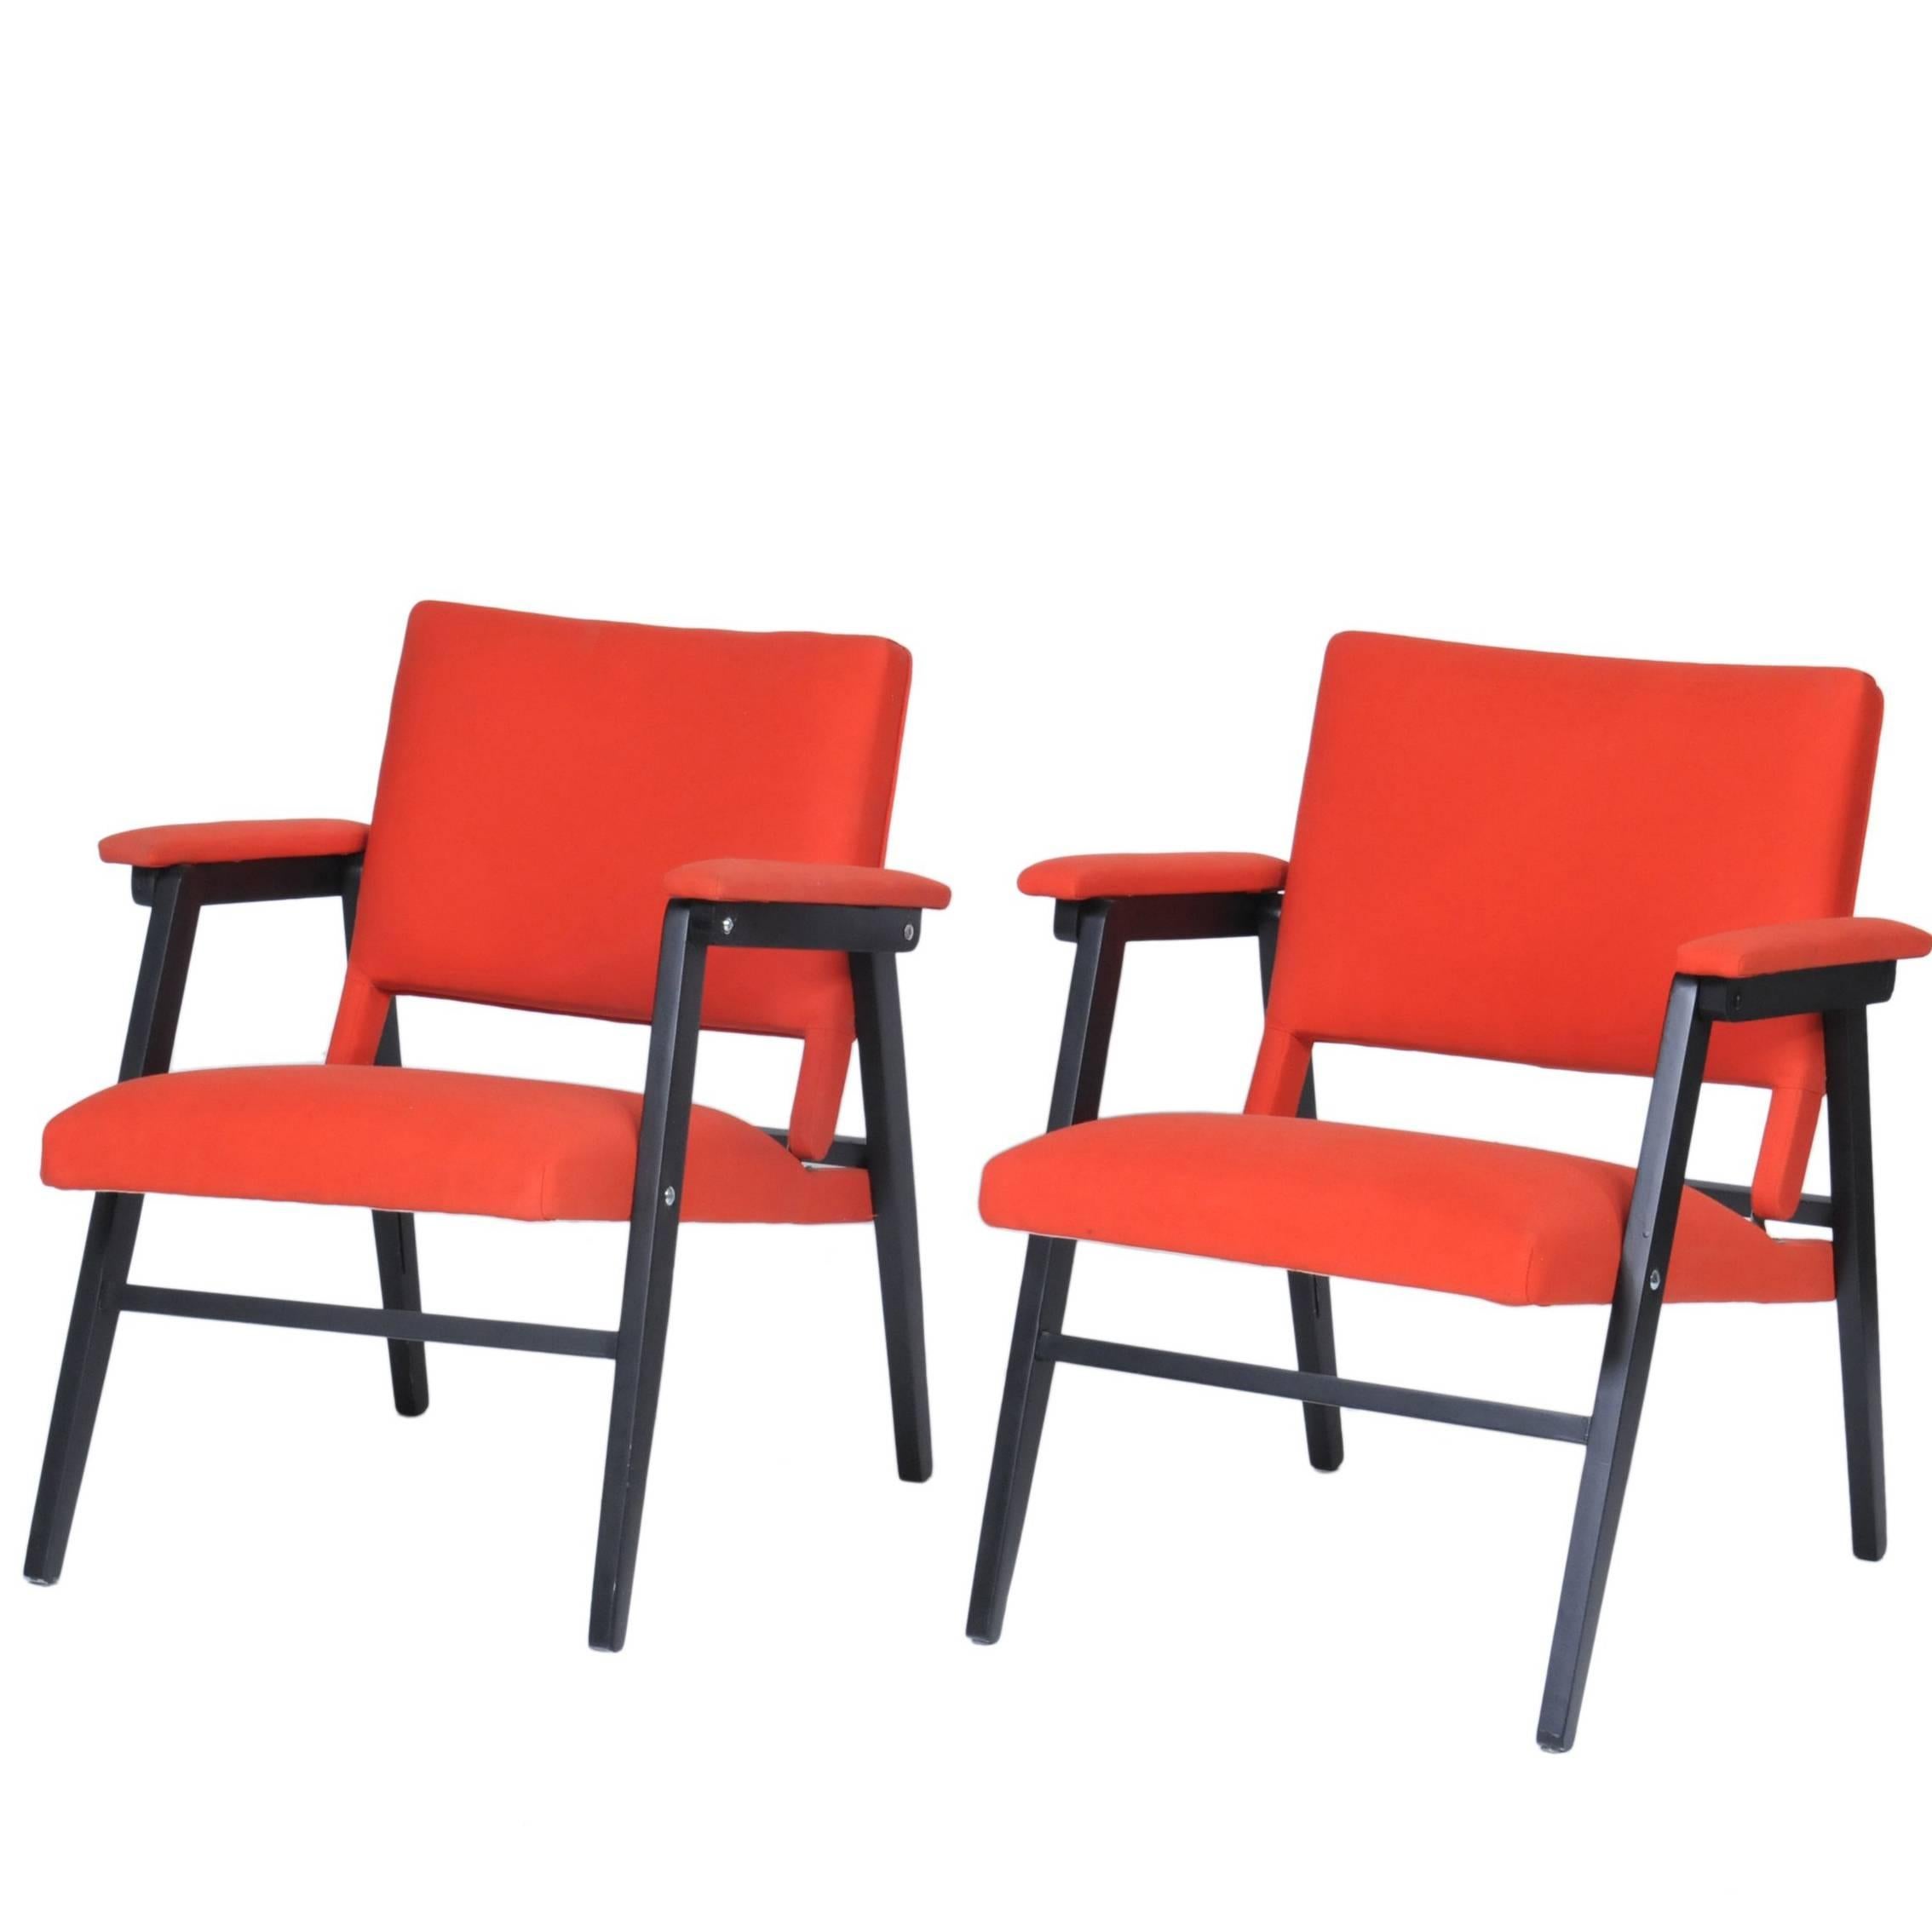 Folding arm chair with black painted wood frame and orange fabric.

This interesting armchair very comfortable to use, has as main characteristic to be foldable, which facilitates its storage.